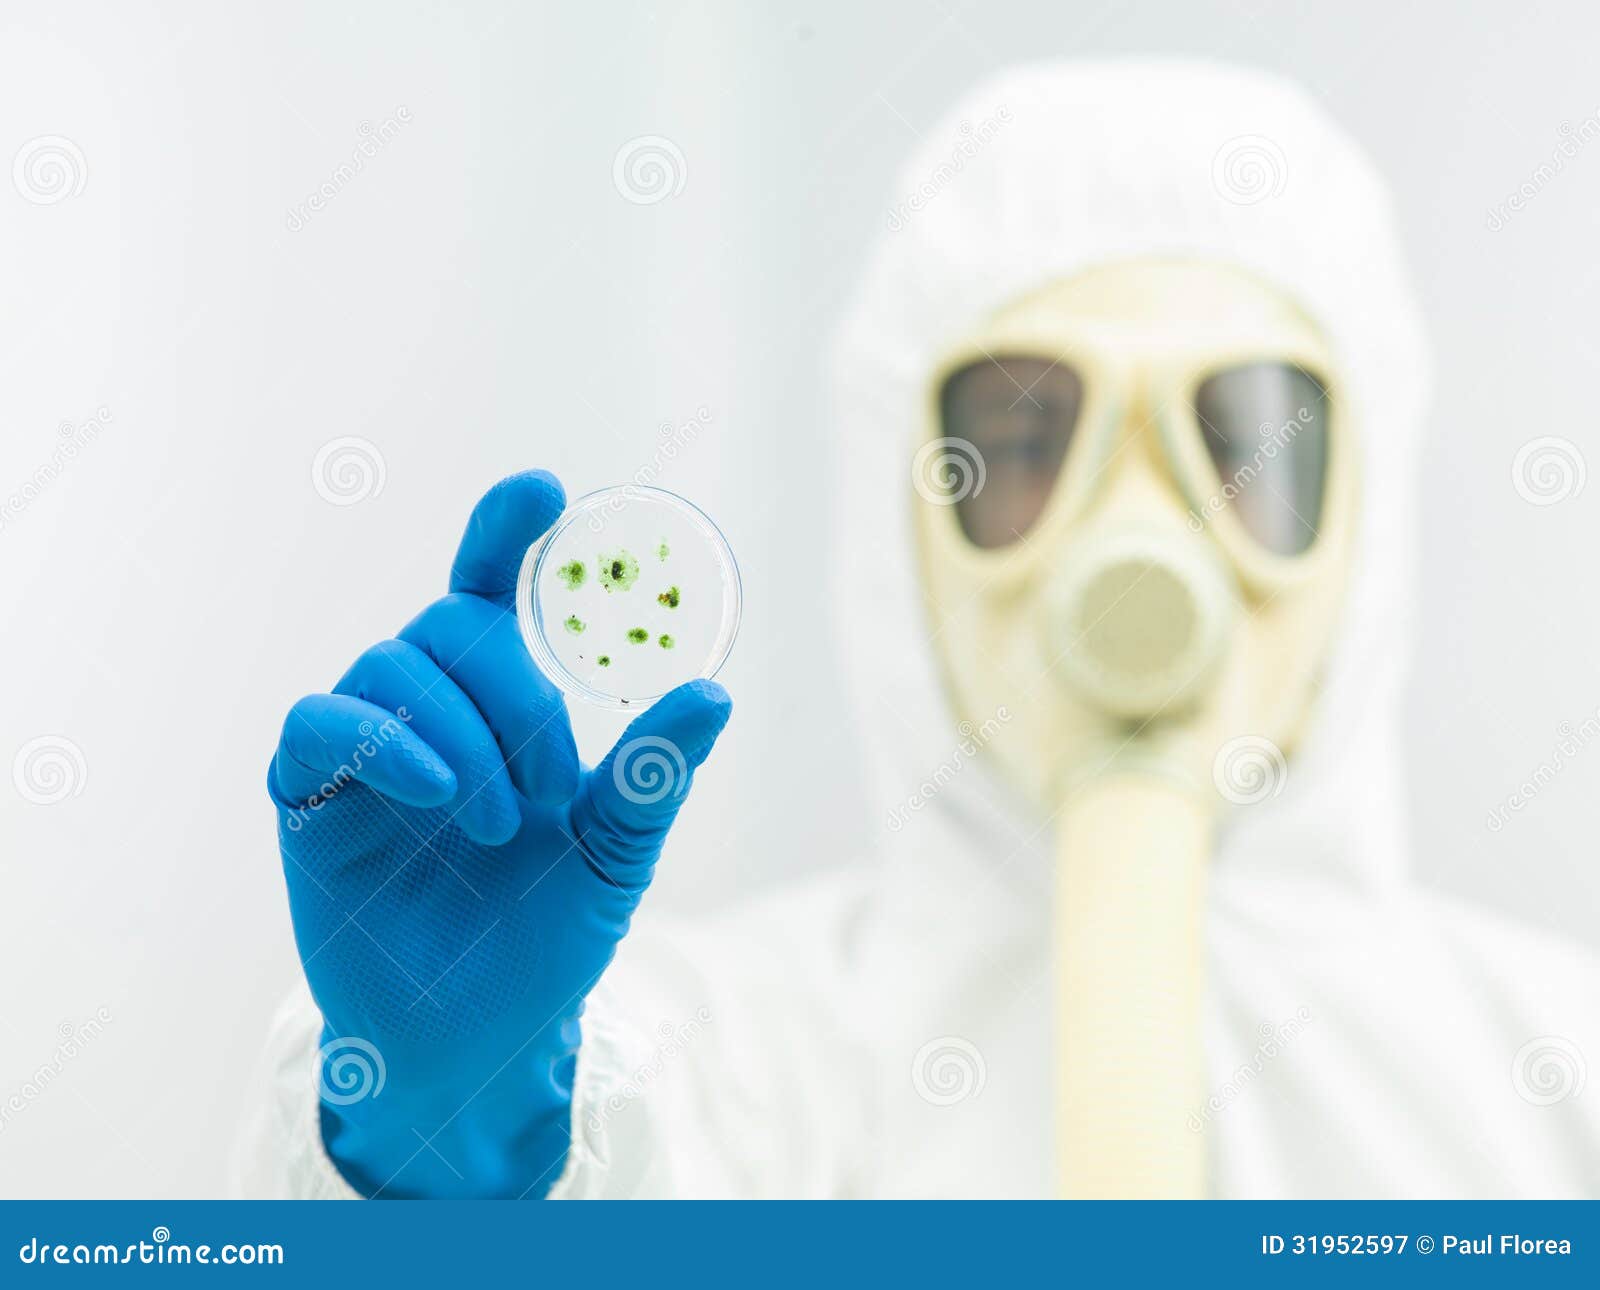 person in protective suit holding microorganism sample